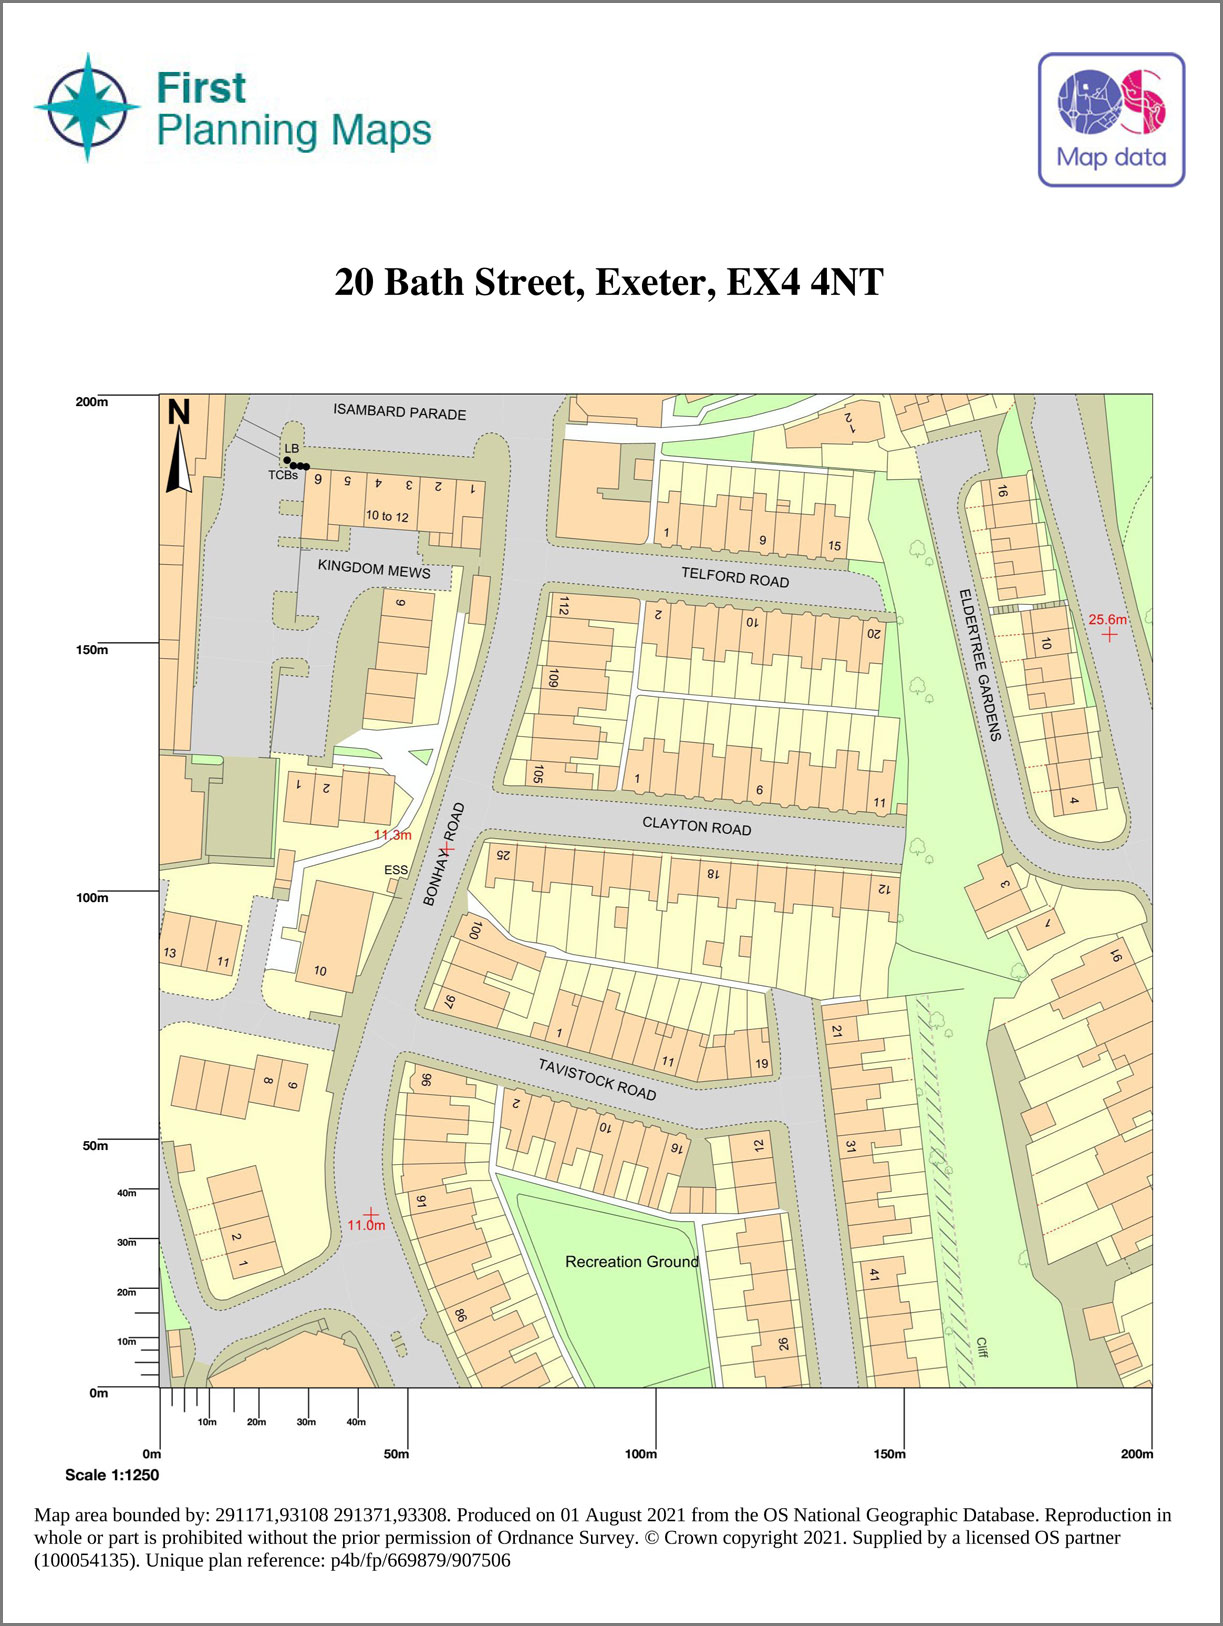 An example Site Location Plan suitable for Planning Application